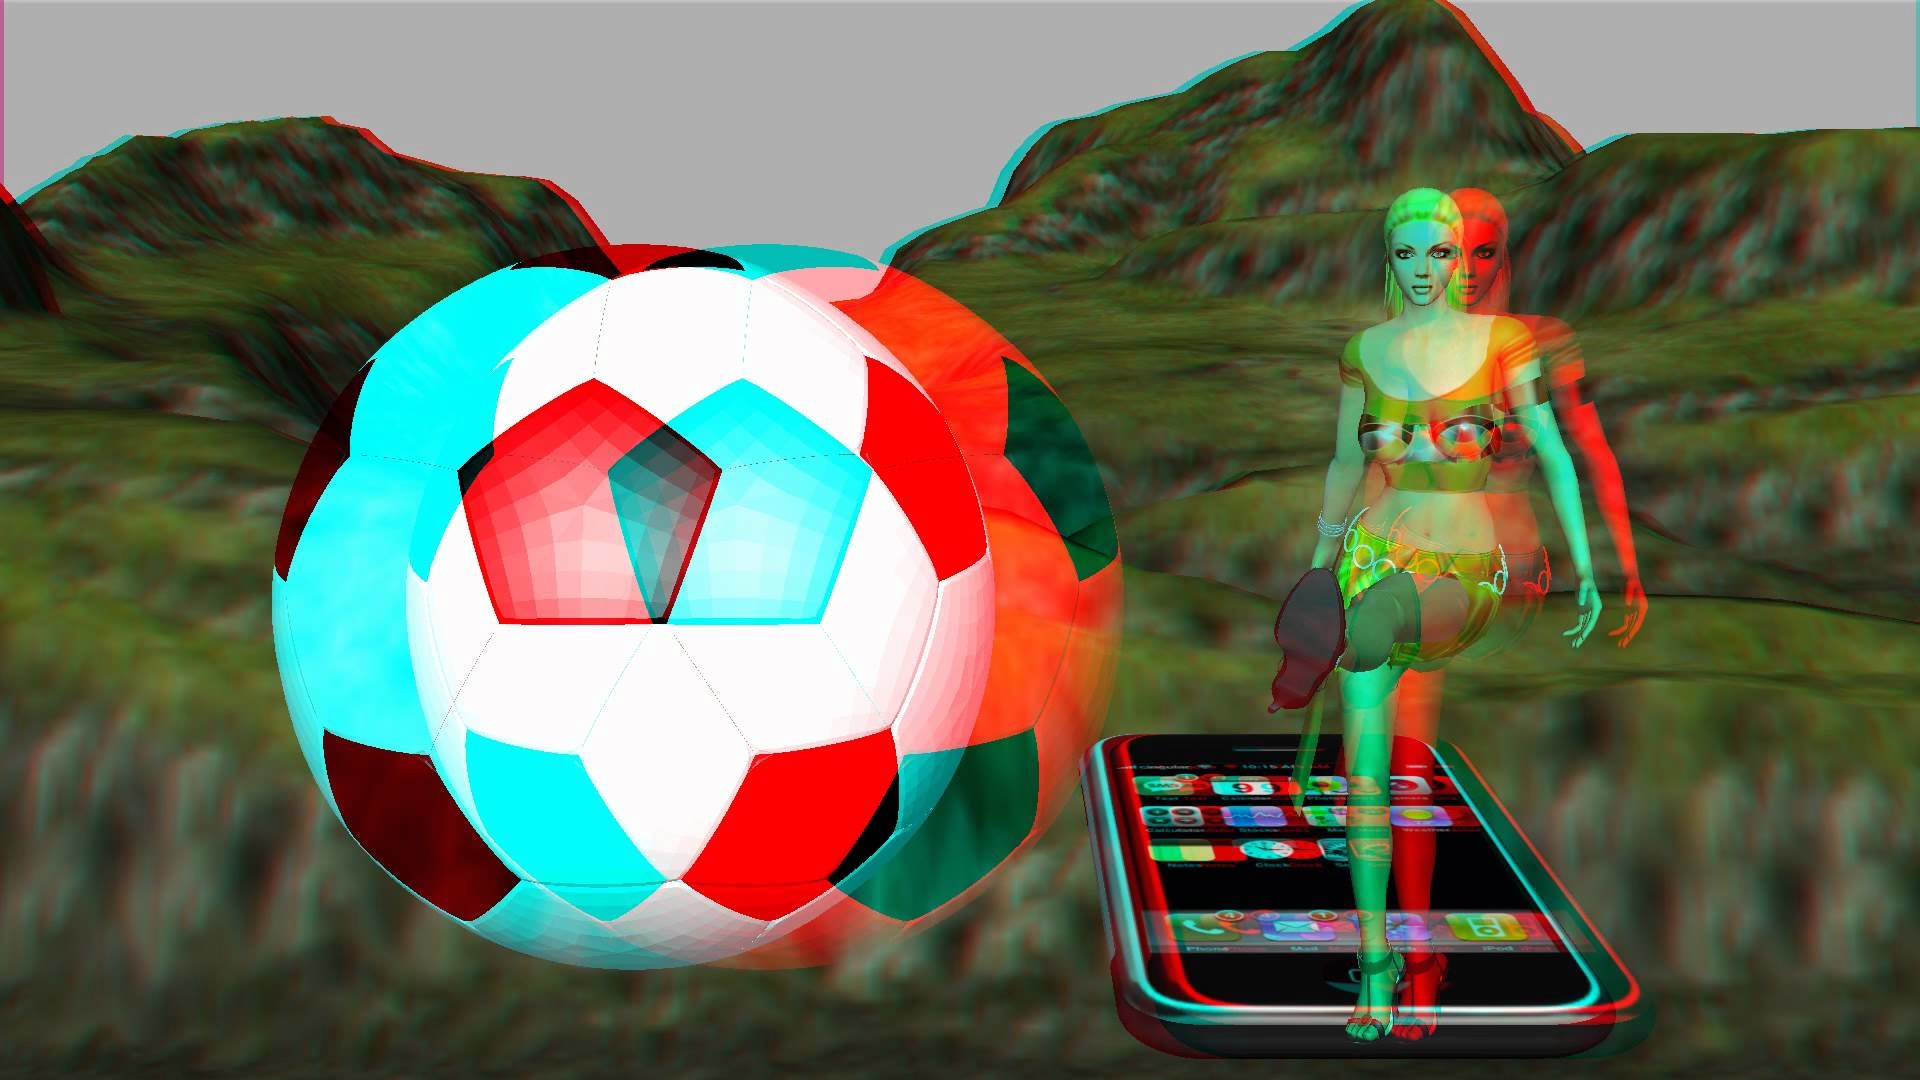 1920x1080 Anaglyph 3D iphone Girl Buy Video Amazon.com & Poster at zazzle.com -  YouTube